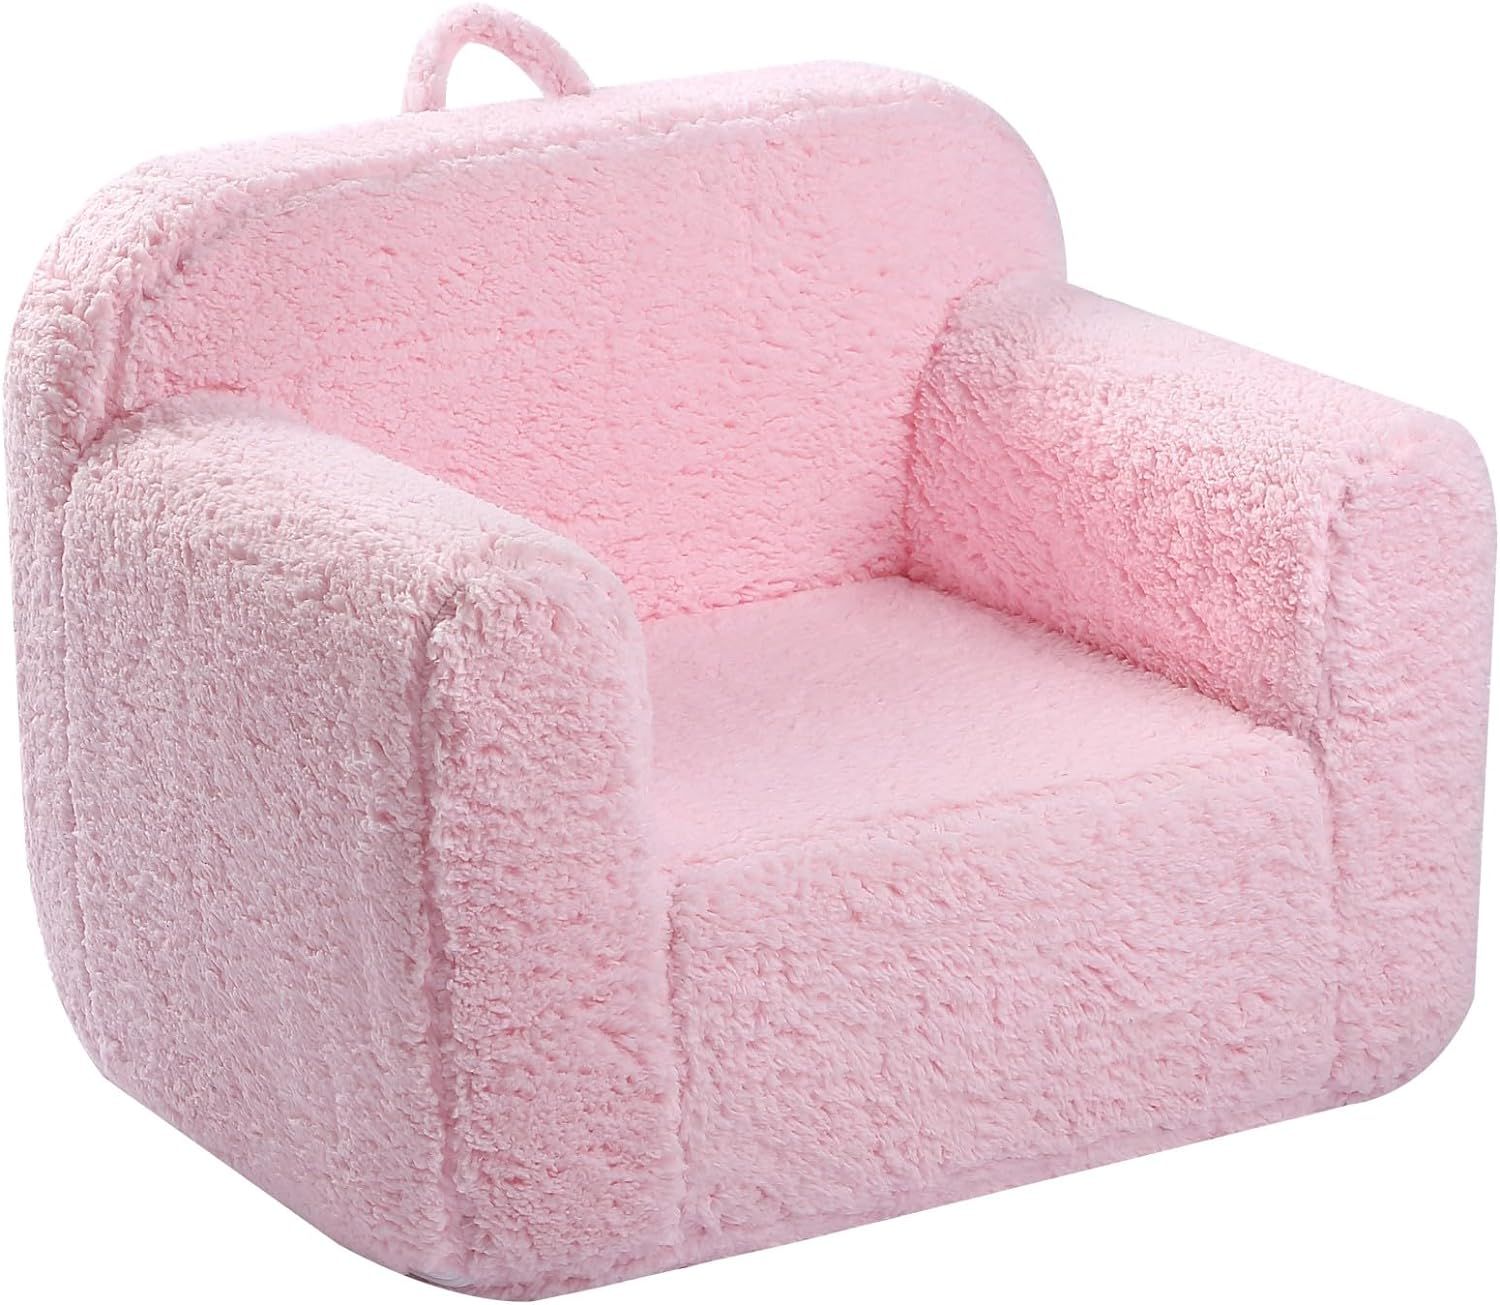 Kids Snuggly-Soft Sherpa Chair, Cuddly Toddler Foam Chair for Boys and Girls, Pink | Amazon (US)